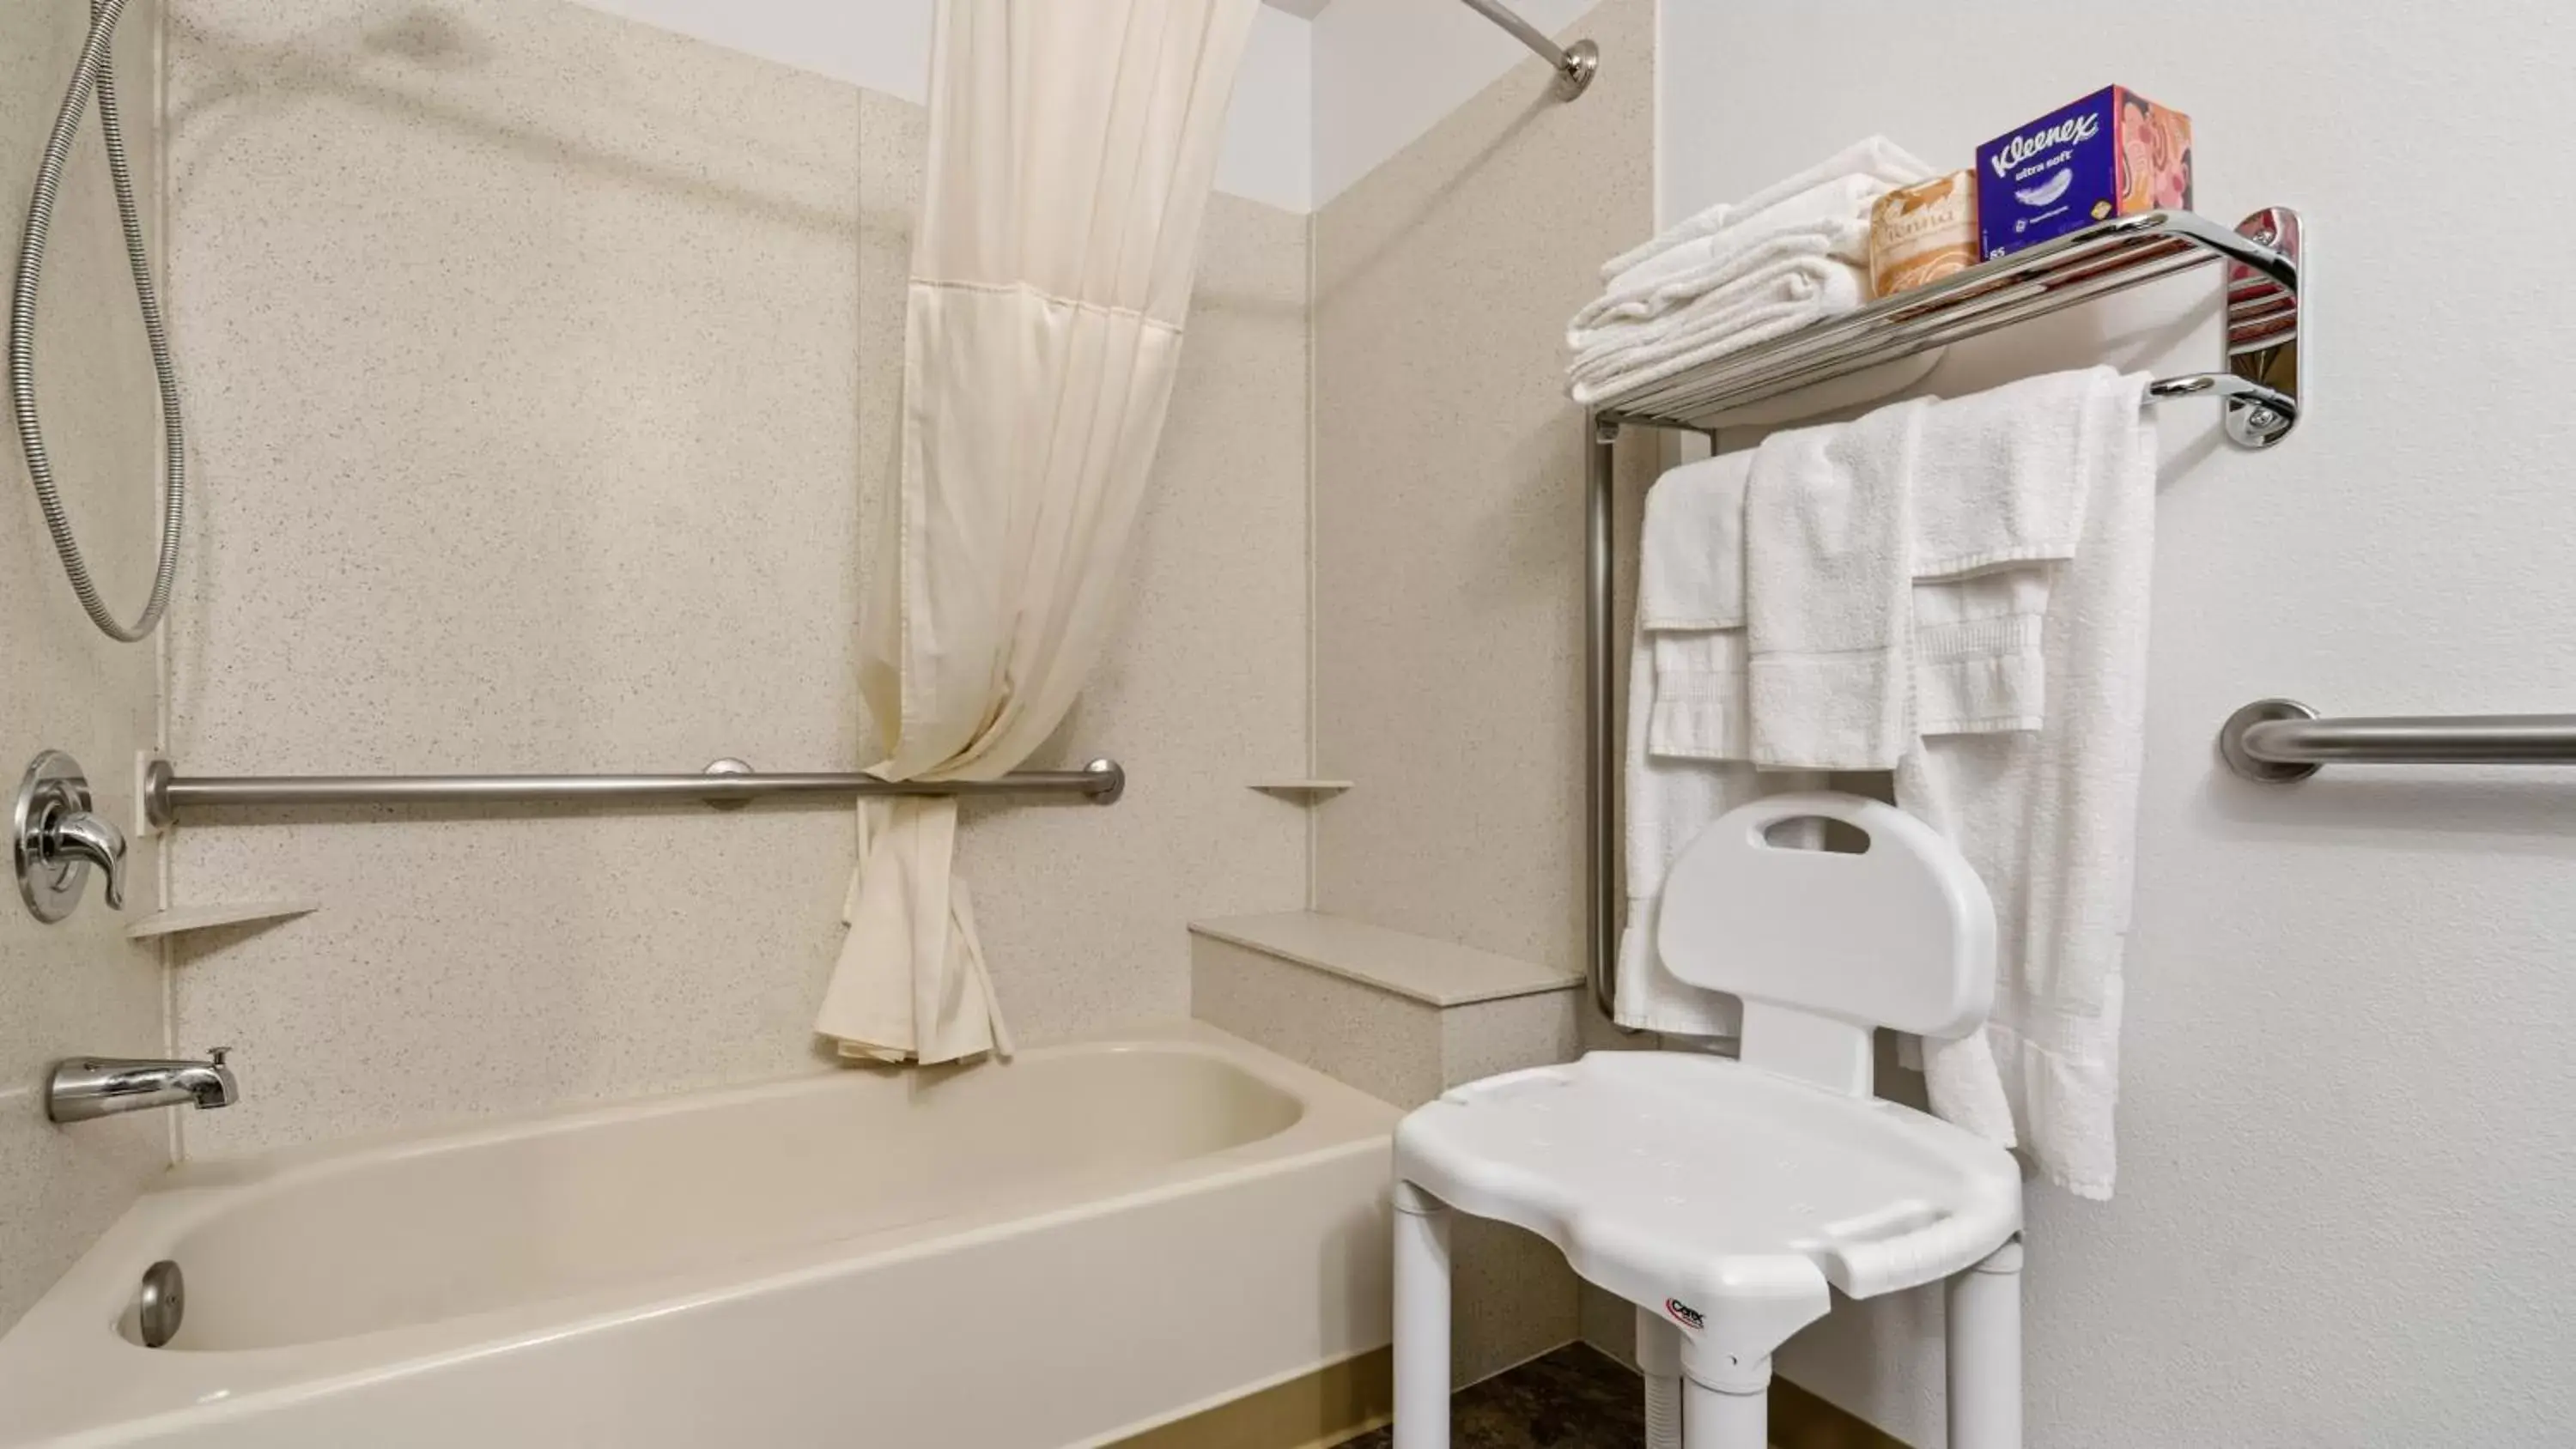 Facility for disabled guests, Bathroom in Clarion Hotel & Suites Fairbanks near Ft. Wainwright